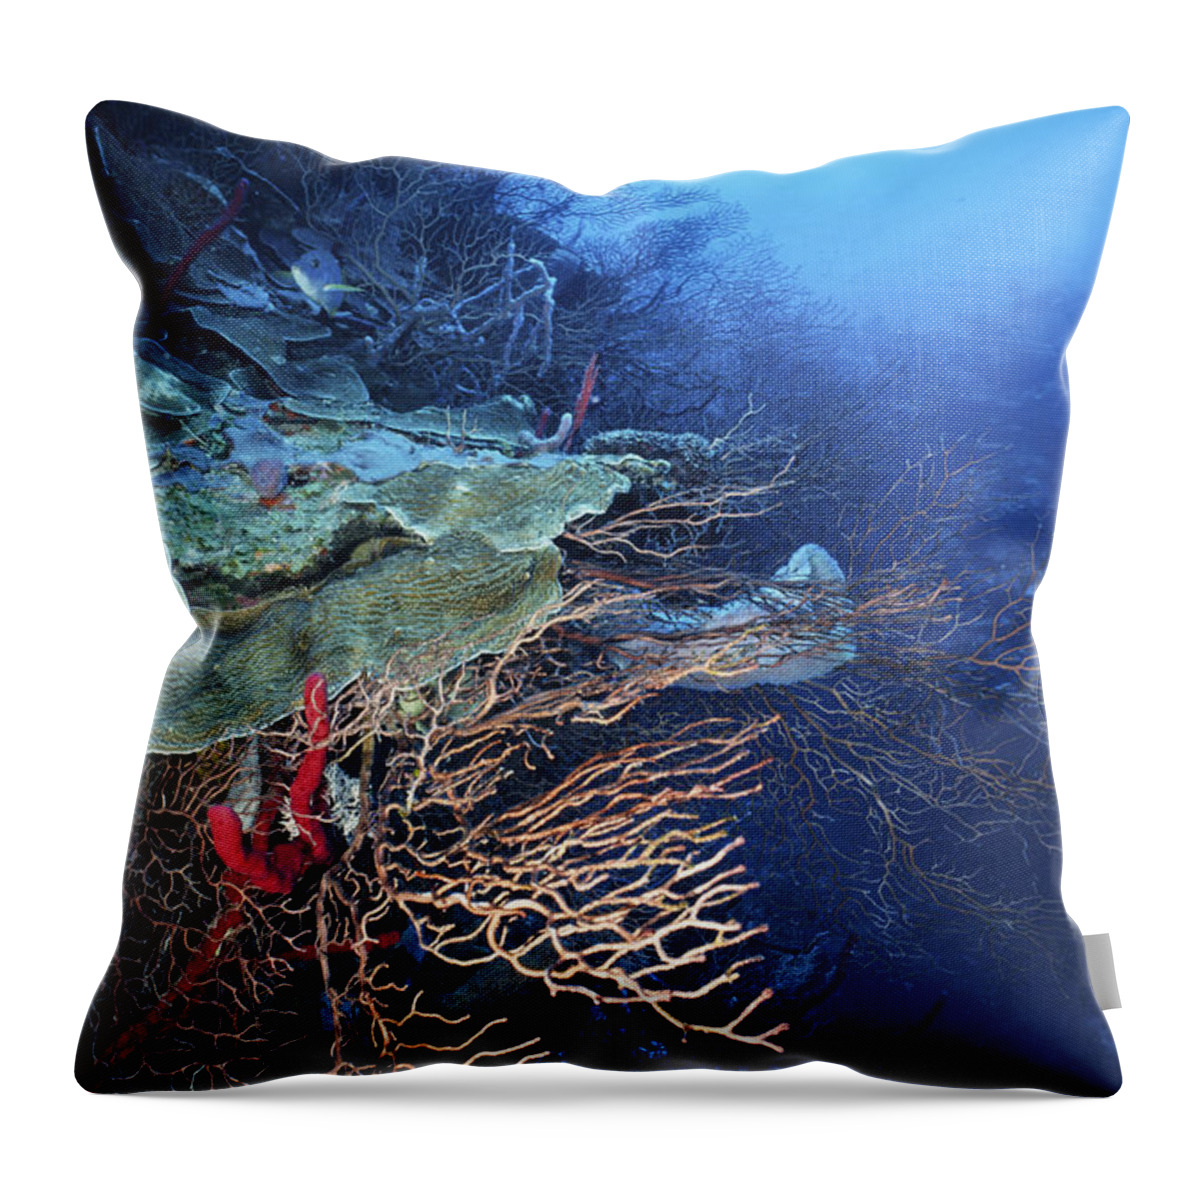 Angle Throw Pillow featuring the photograph A Peaceful Place by Sandra Edwards